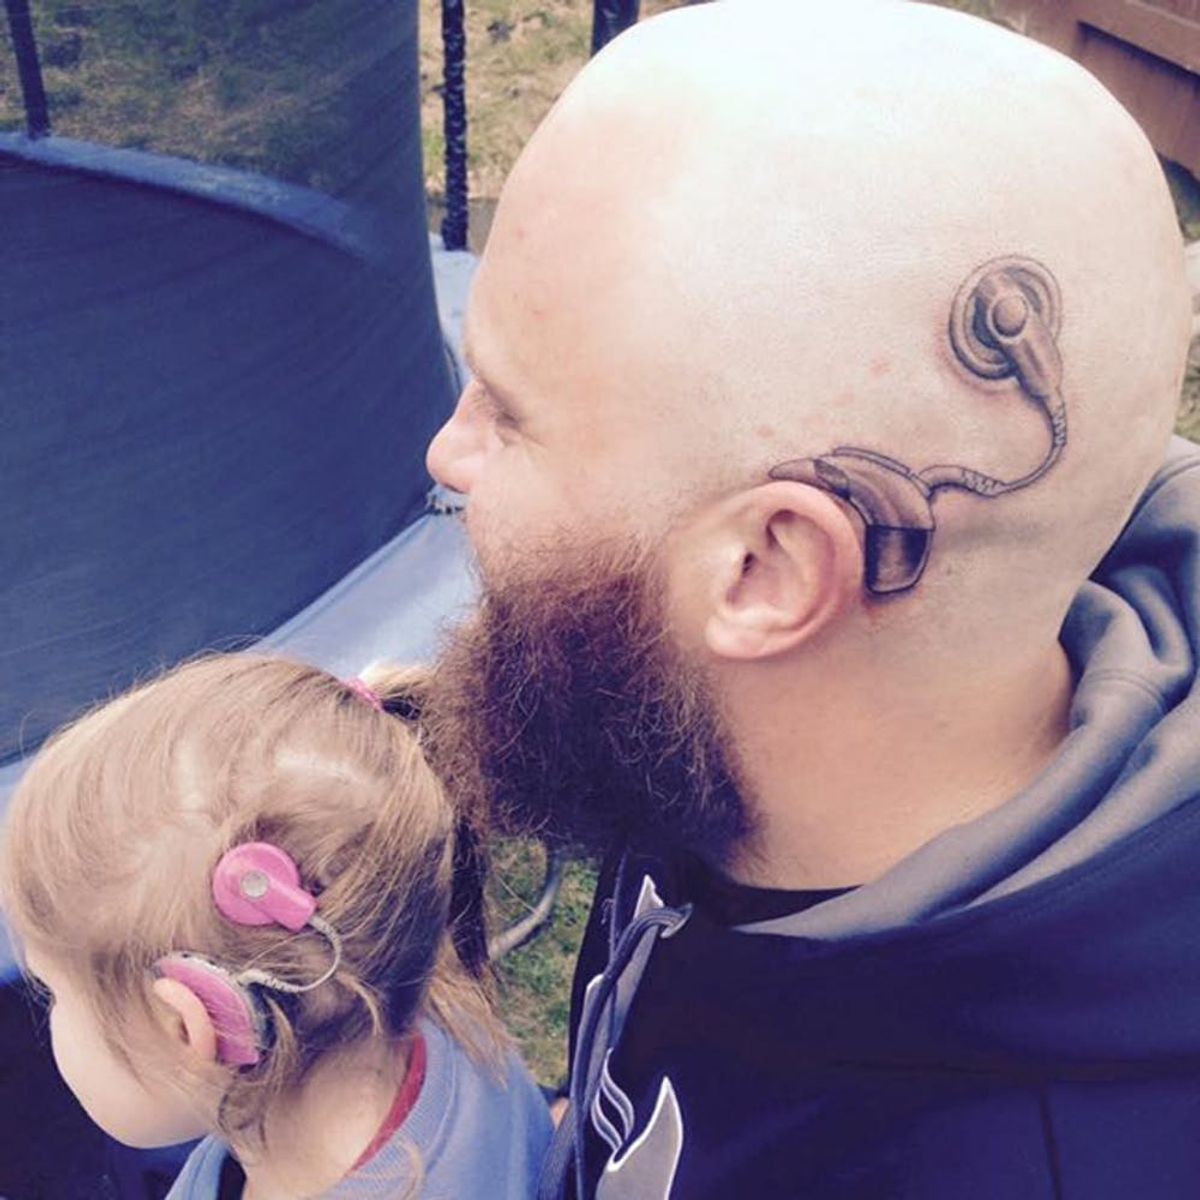 This Dad’s Tattoo for His Daughter Is Amazing